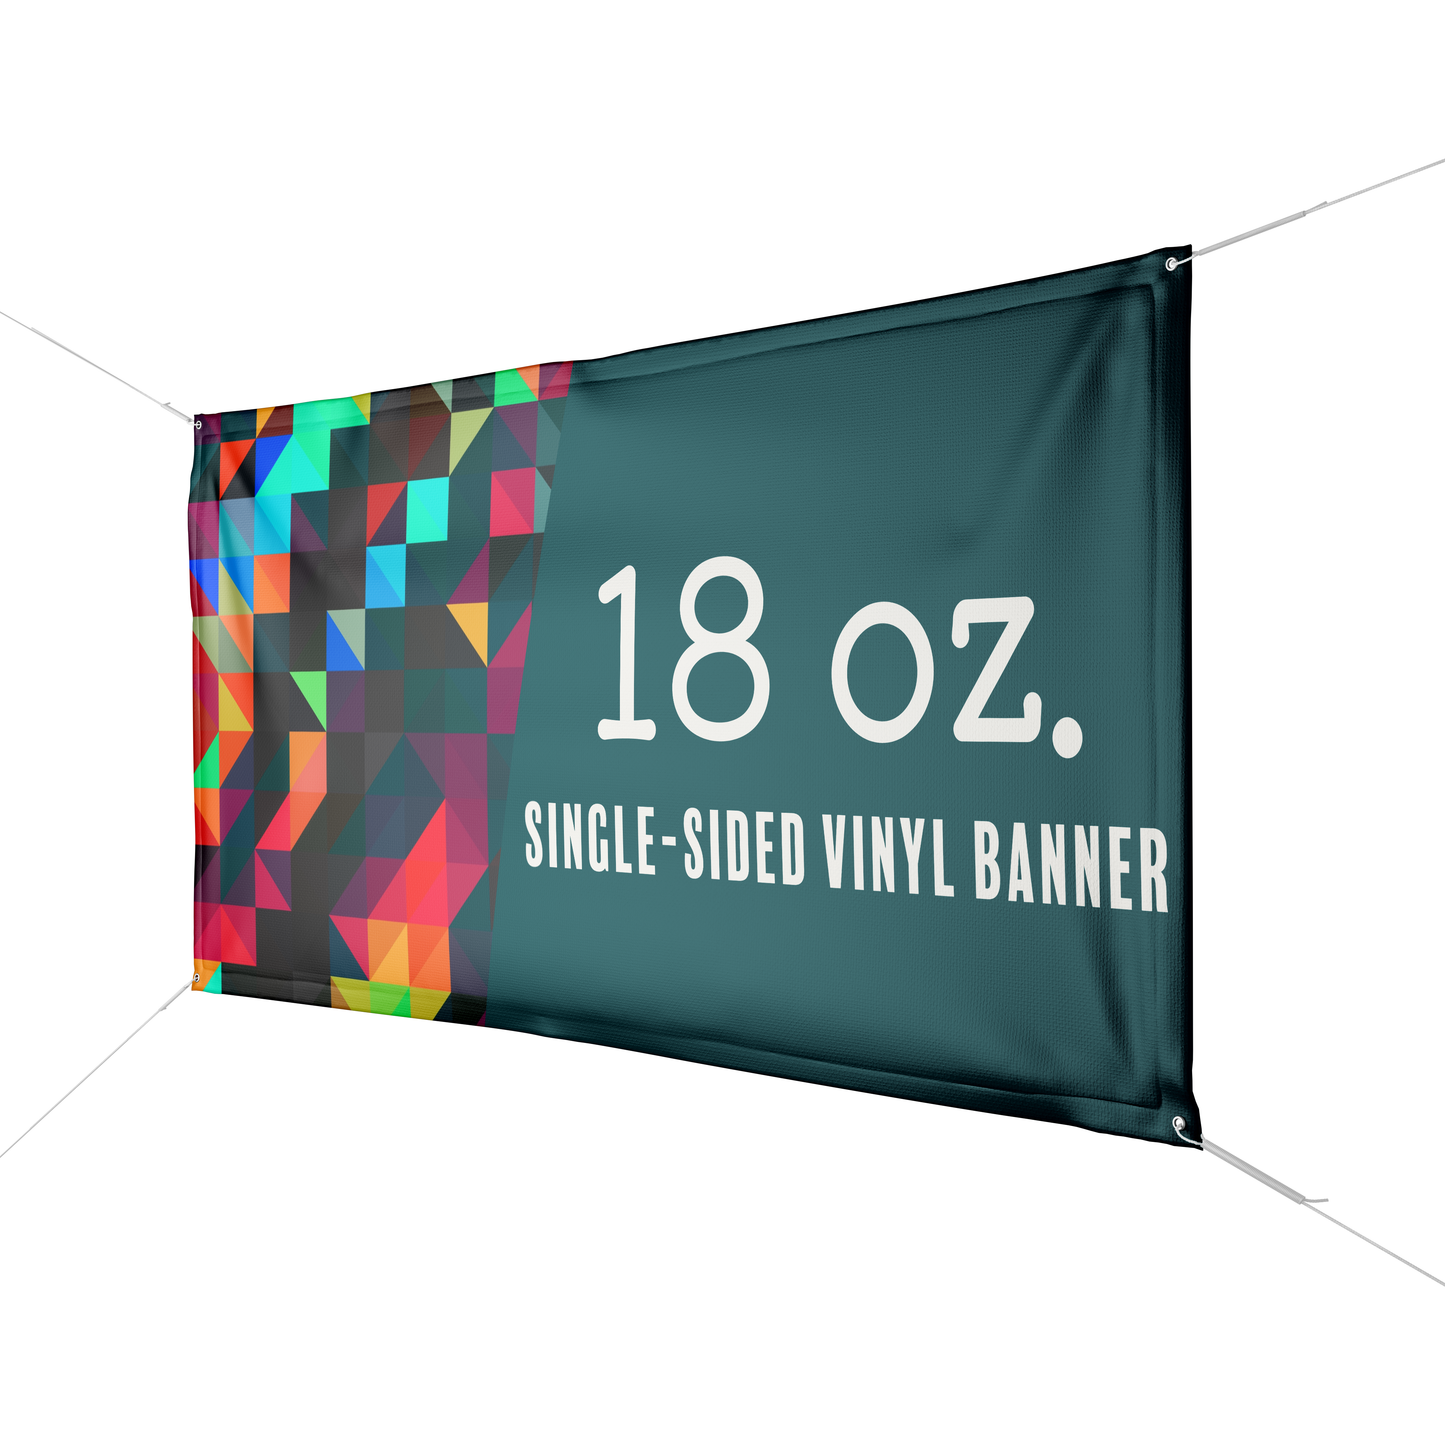 A colorful banner is displayed to show an example of a 18 oz vinyl banner.